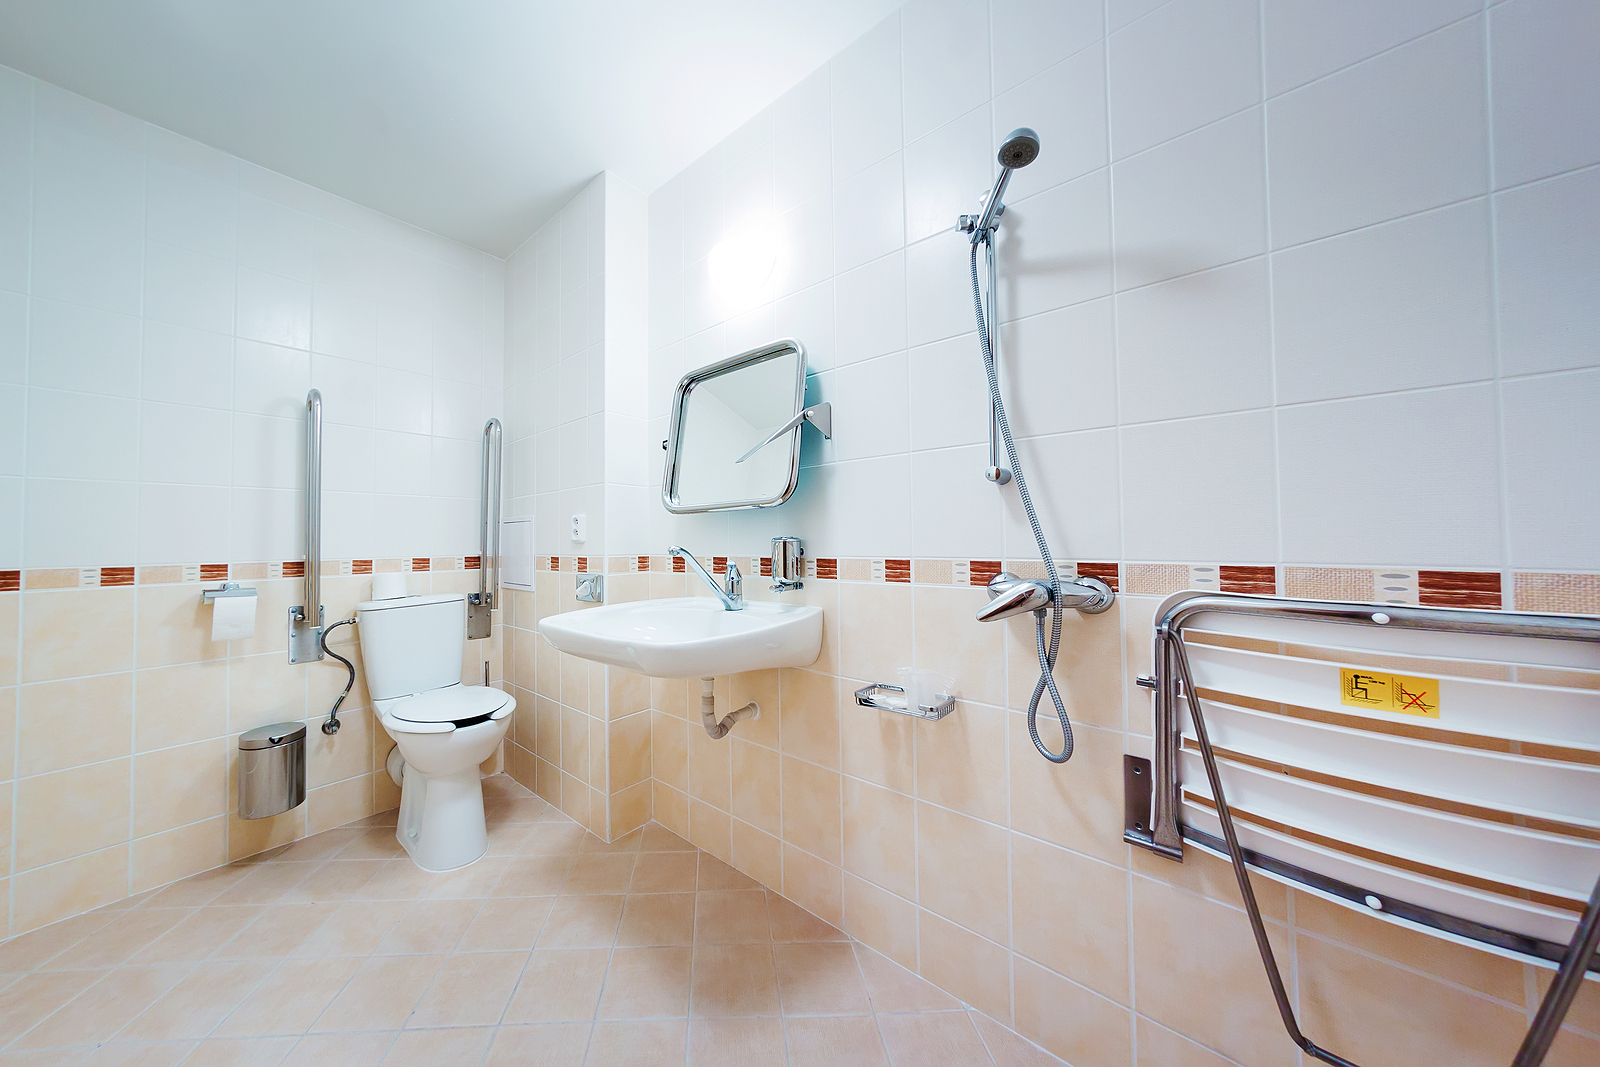 Half height shower doors - Bathroom with grab bars for people with disabilities